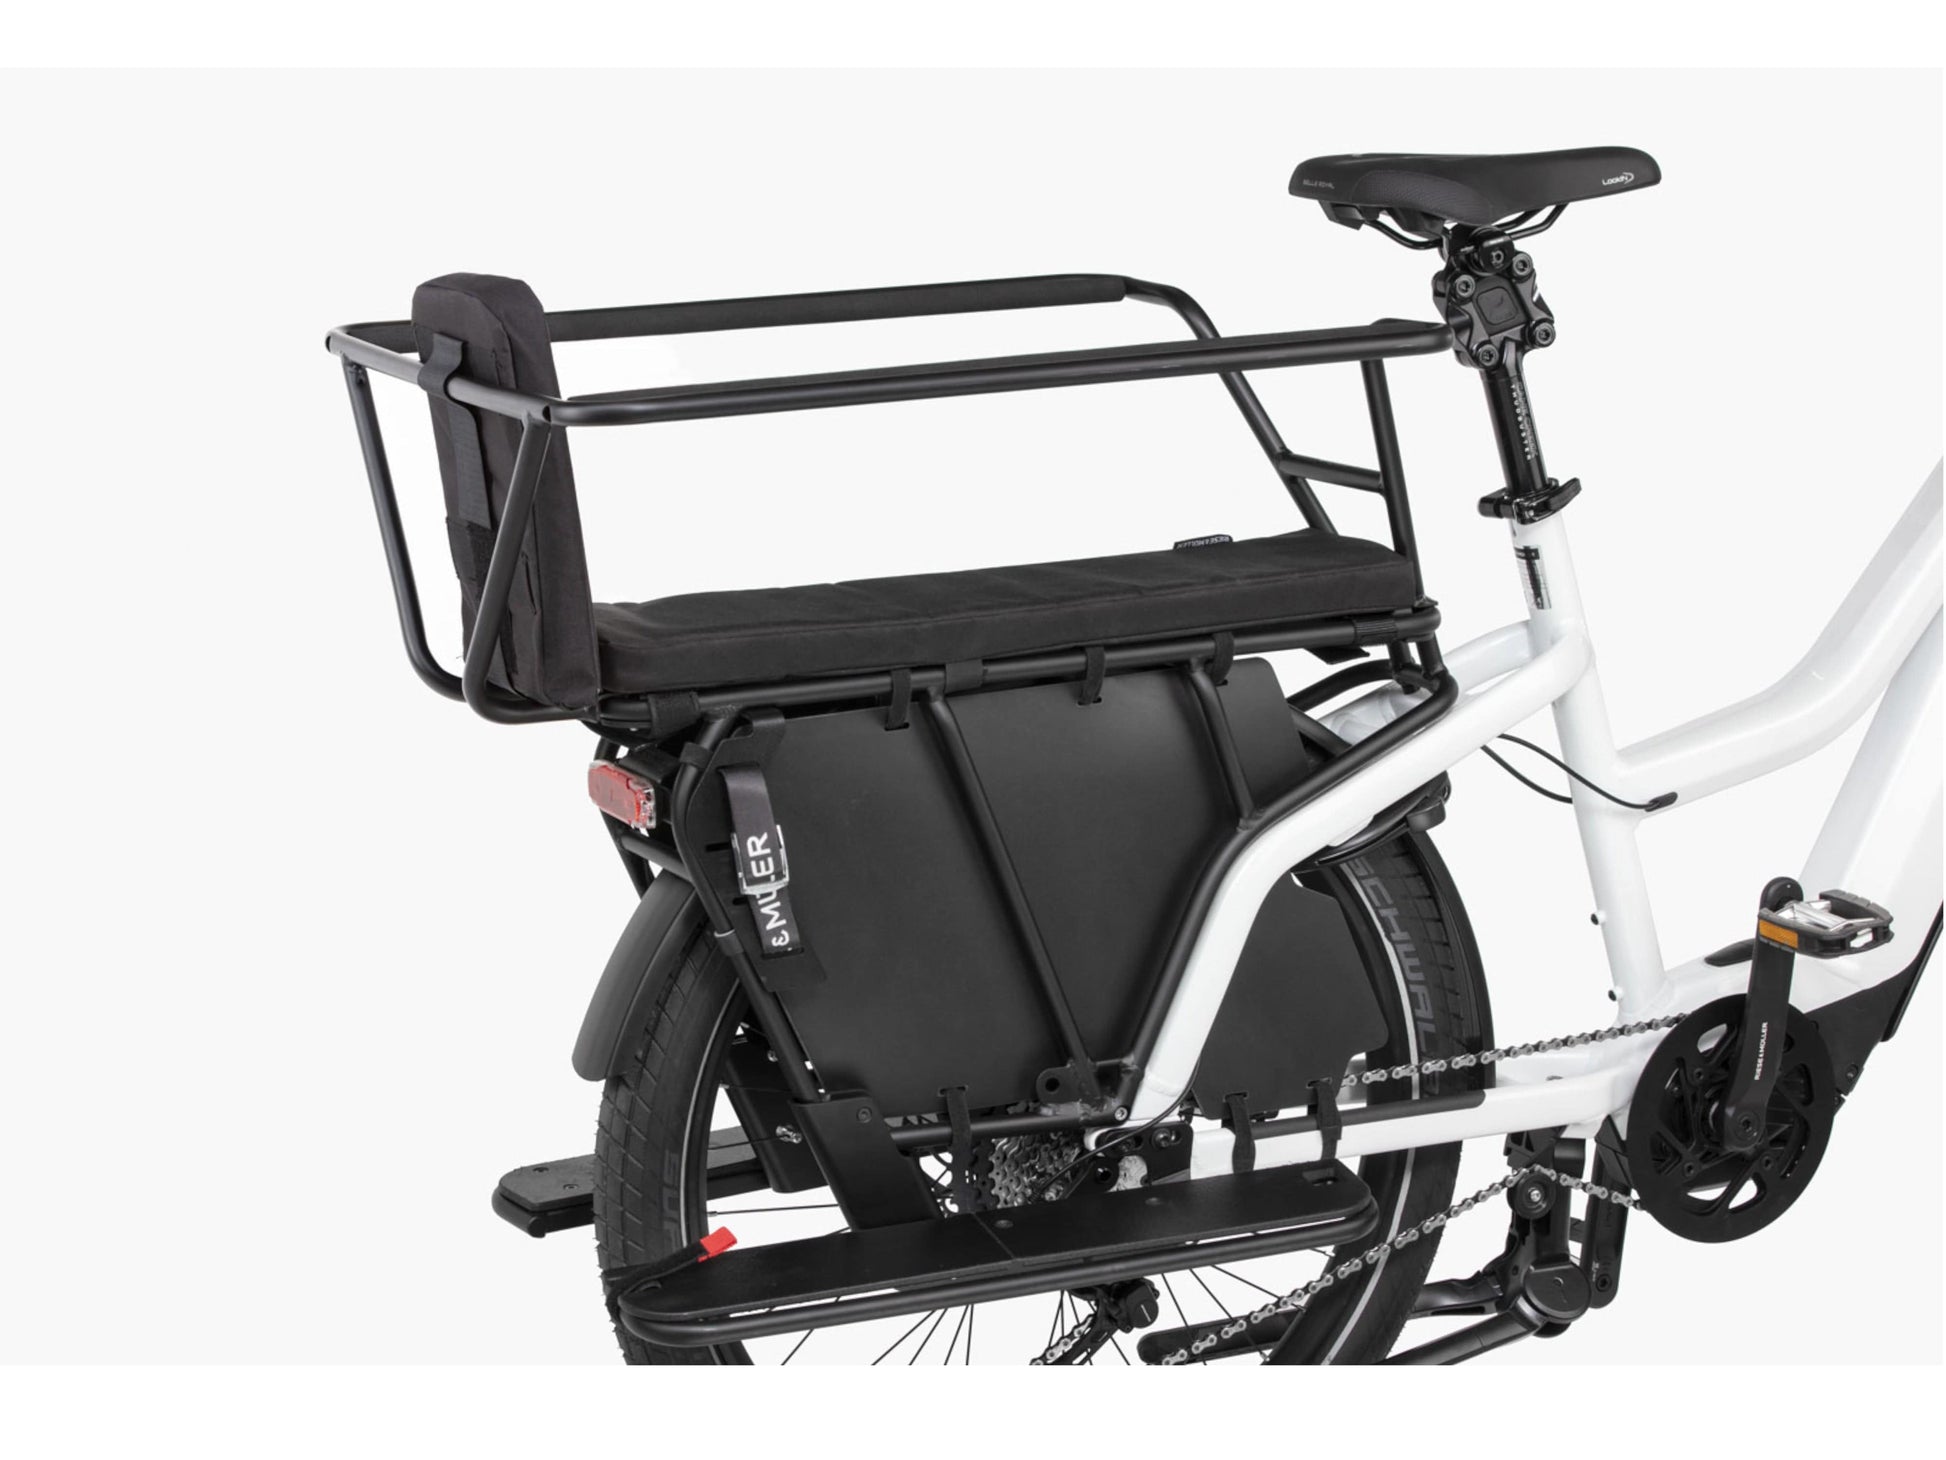 Riese and Muller Multicharger Mixte GT Vario HS emtb hardtail closeup rear carrier passenger safety kit option